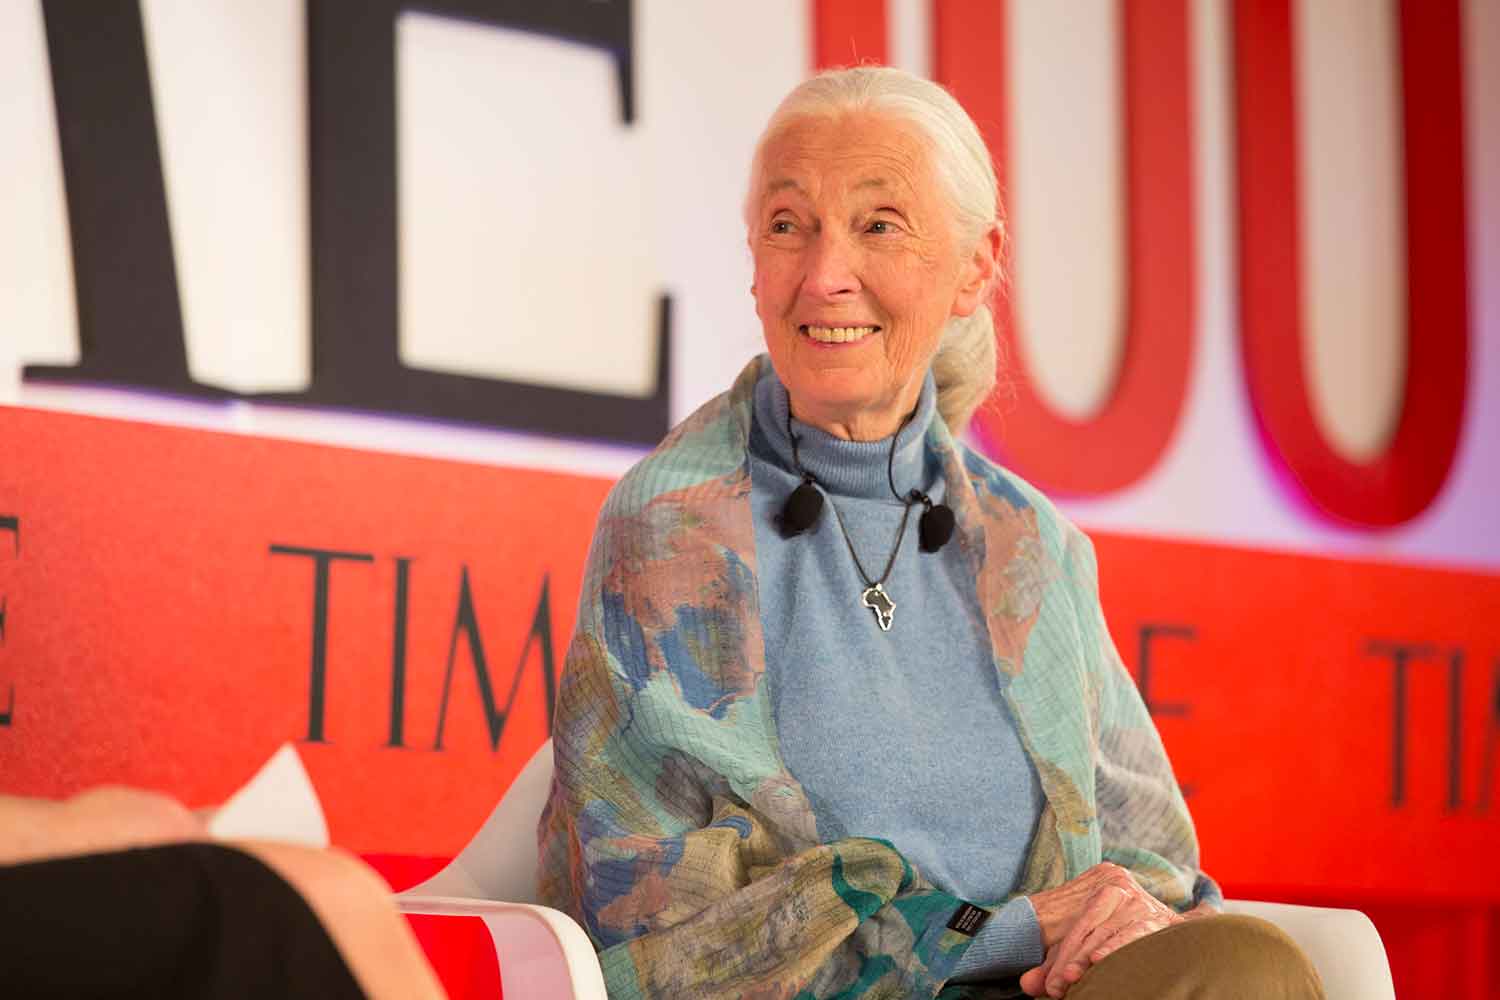 Jane Goodall Calls for Billions of People To 'Make Ethical Choices' To Save the Planet